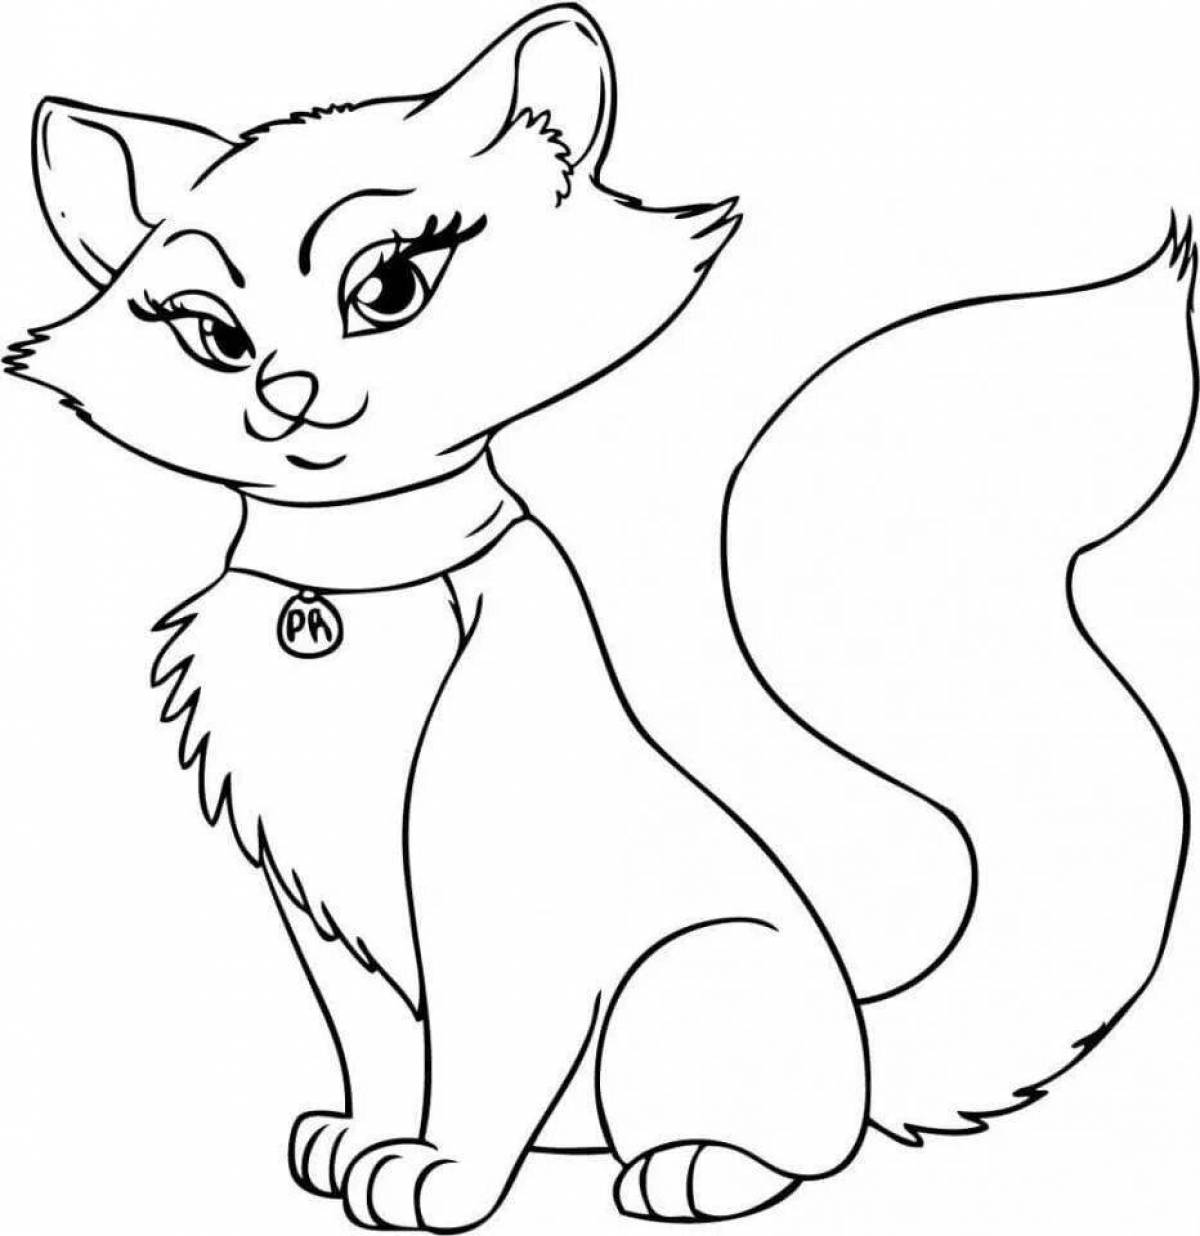 Coloring page bright mother cat